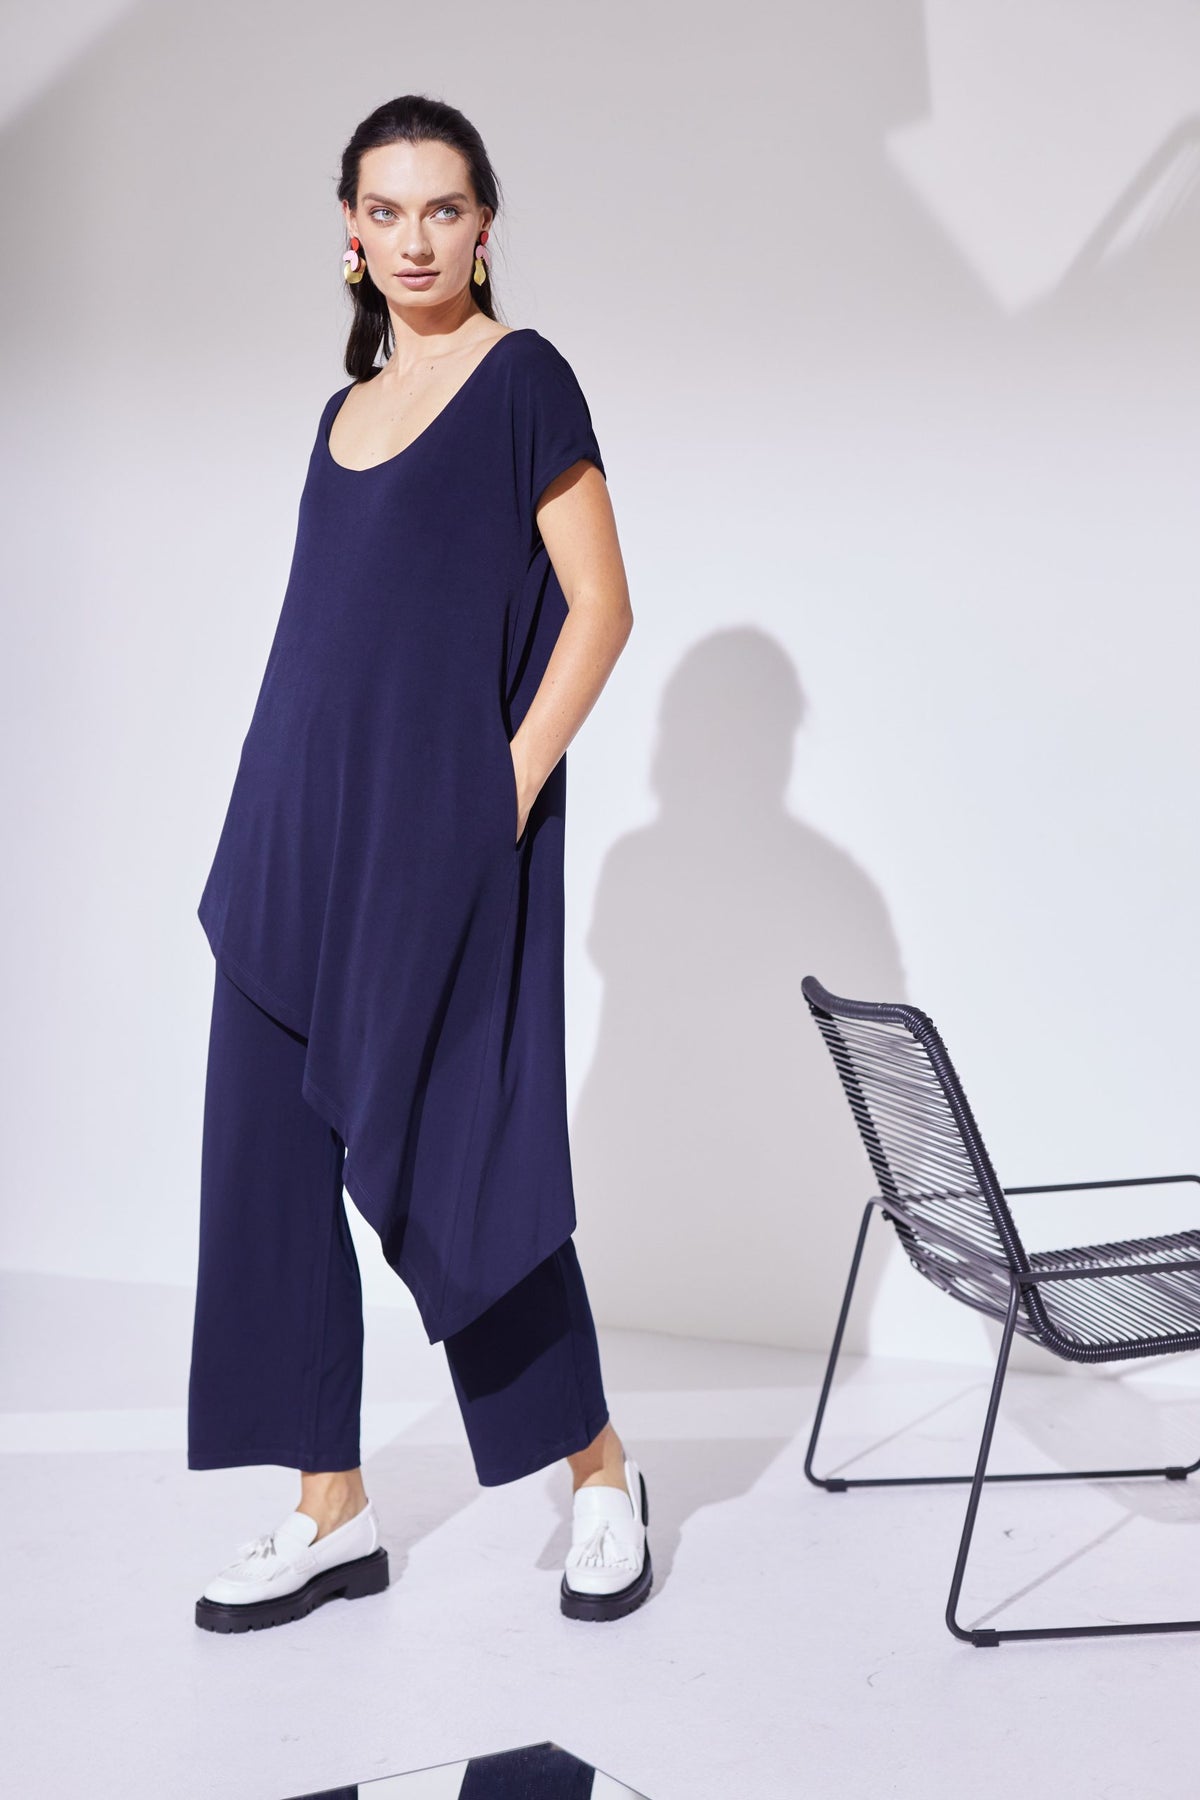 Naya - Over the Top Jumpsuit in Navy